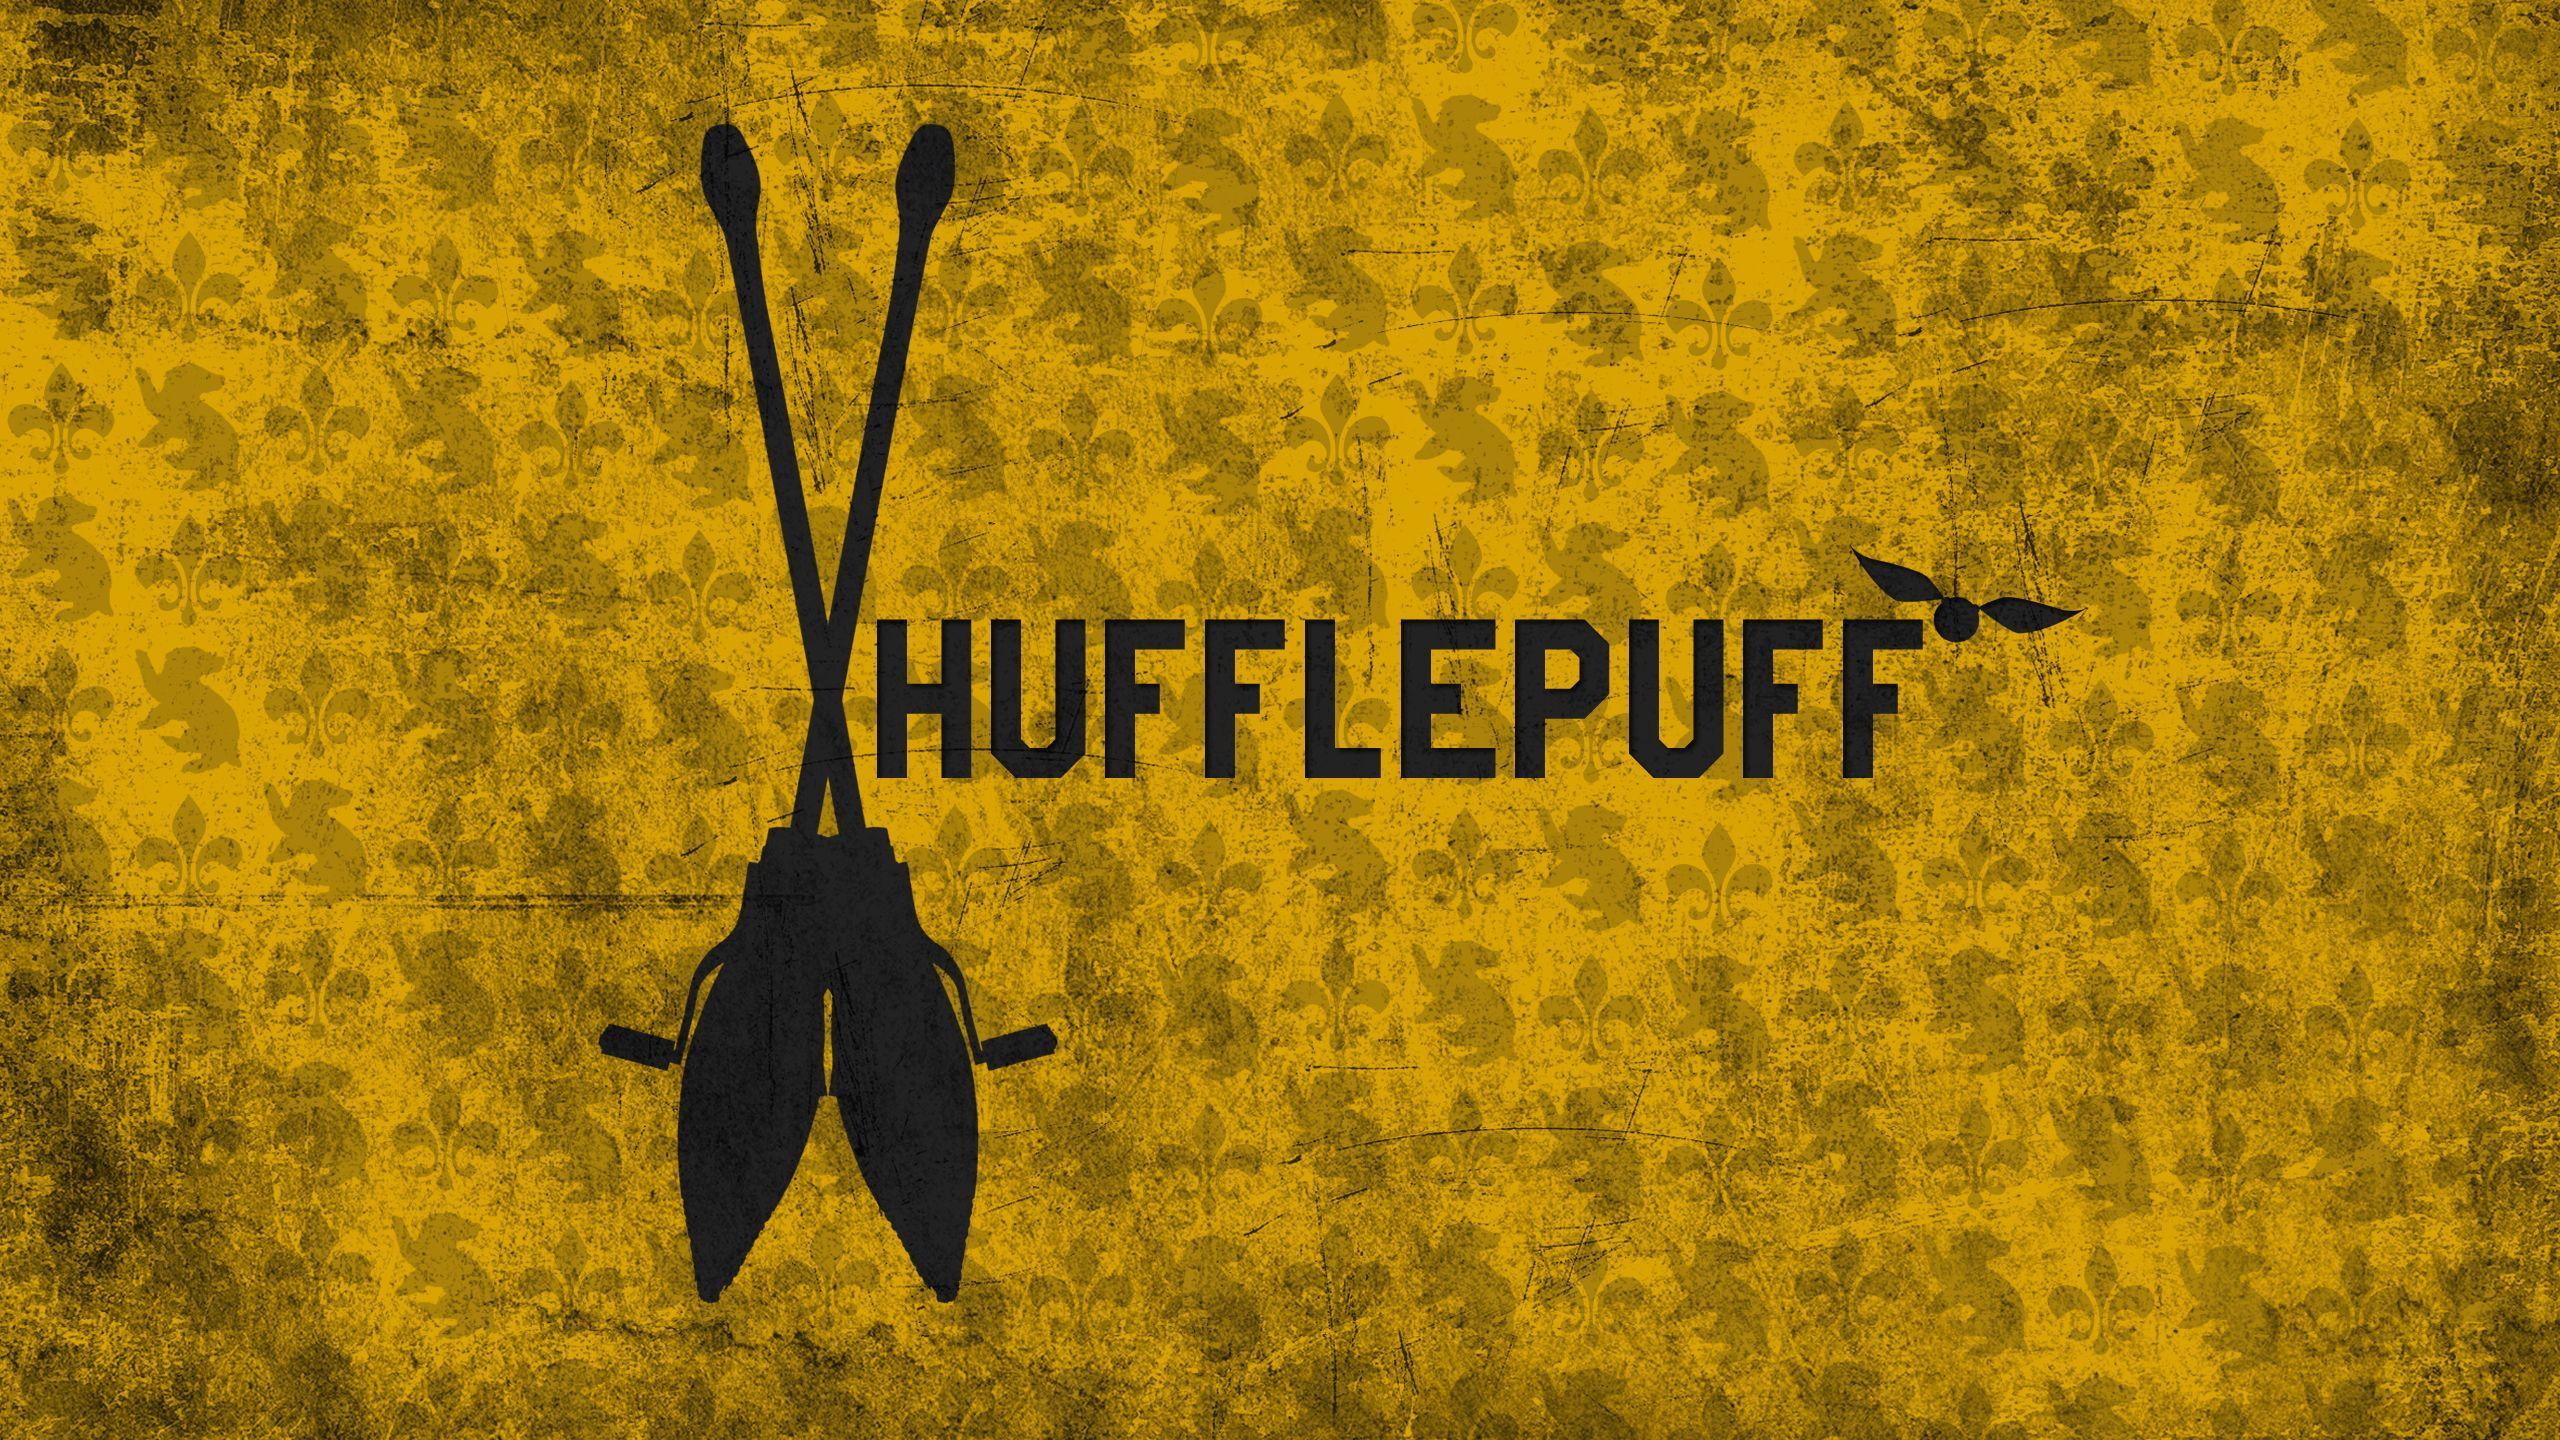 Hufflepuff wallpaper by psychogirl92  Download on ZEDGE  b740